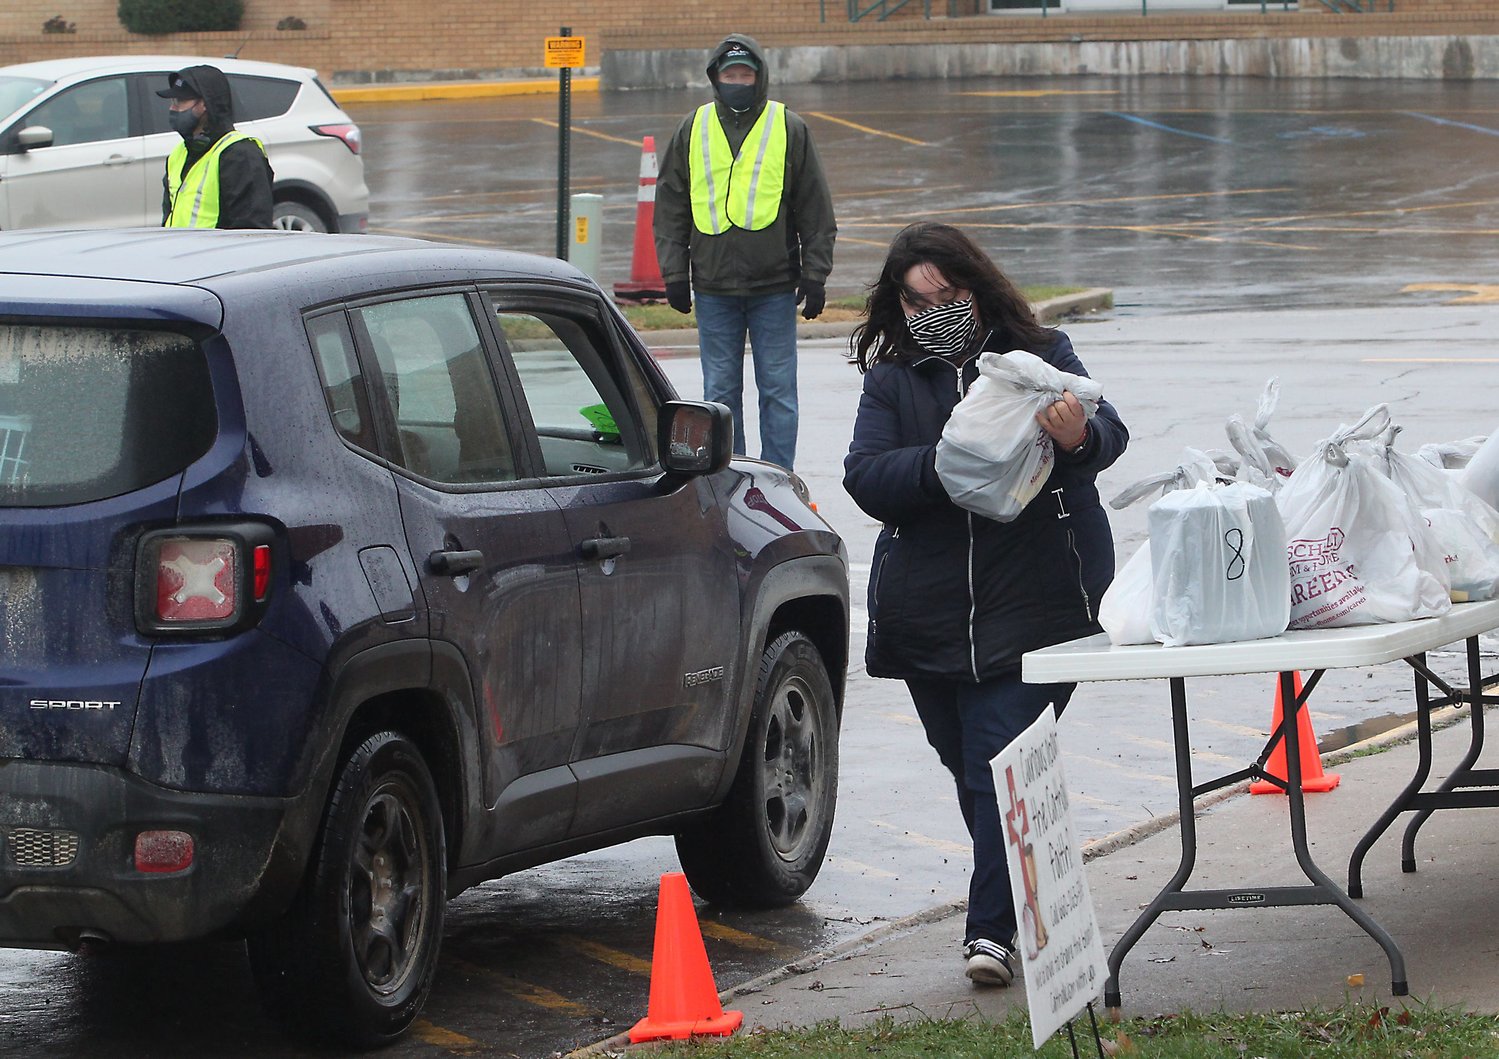 Crystal Wright prepares to place Thanksgiving meals into a vehicle Wednesday during the 16th annual Moberly Community Goodwill Thanksgiving Dinner. Meals were distributed in a drive-thru or pedestrian pick-up at Saint Pius X Catholic Church instead of the sit-down meal at Zion Lutheran Church in Moberly due to COVID-19 restrictions.